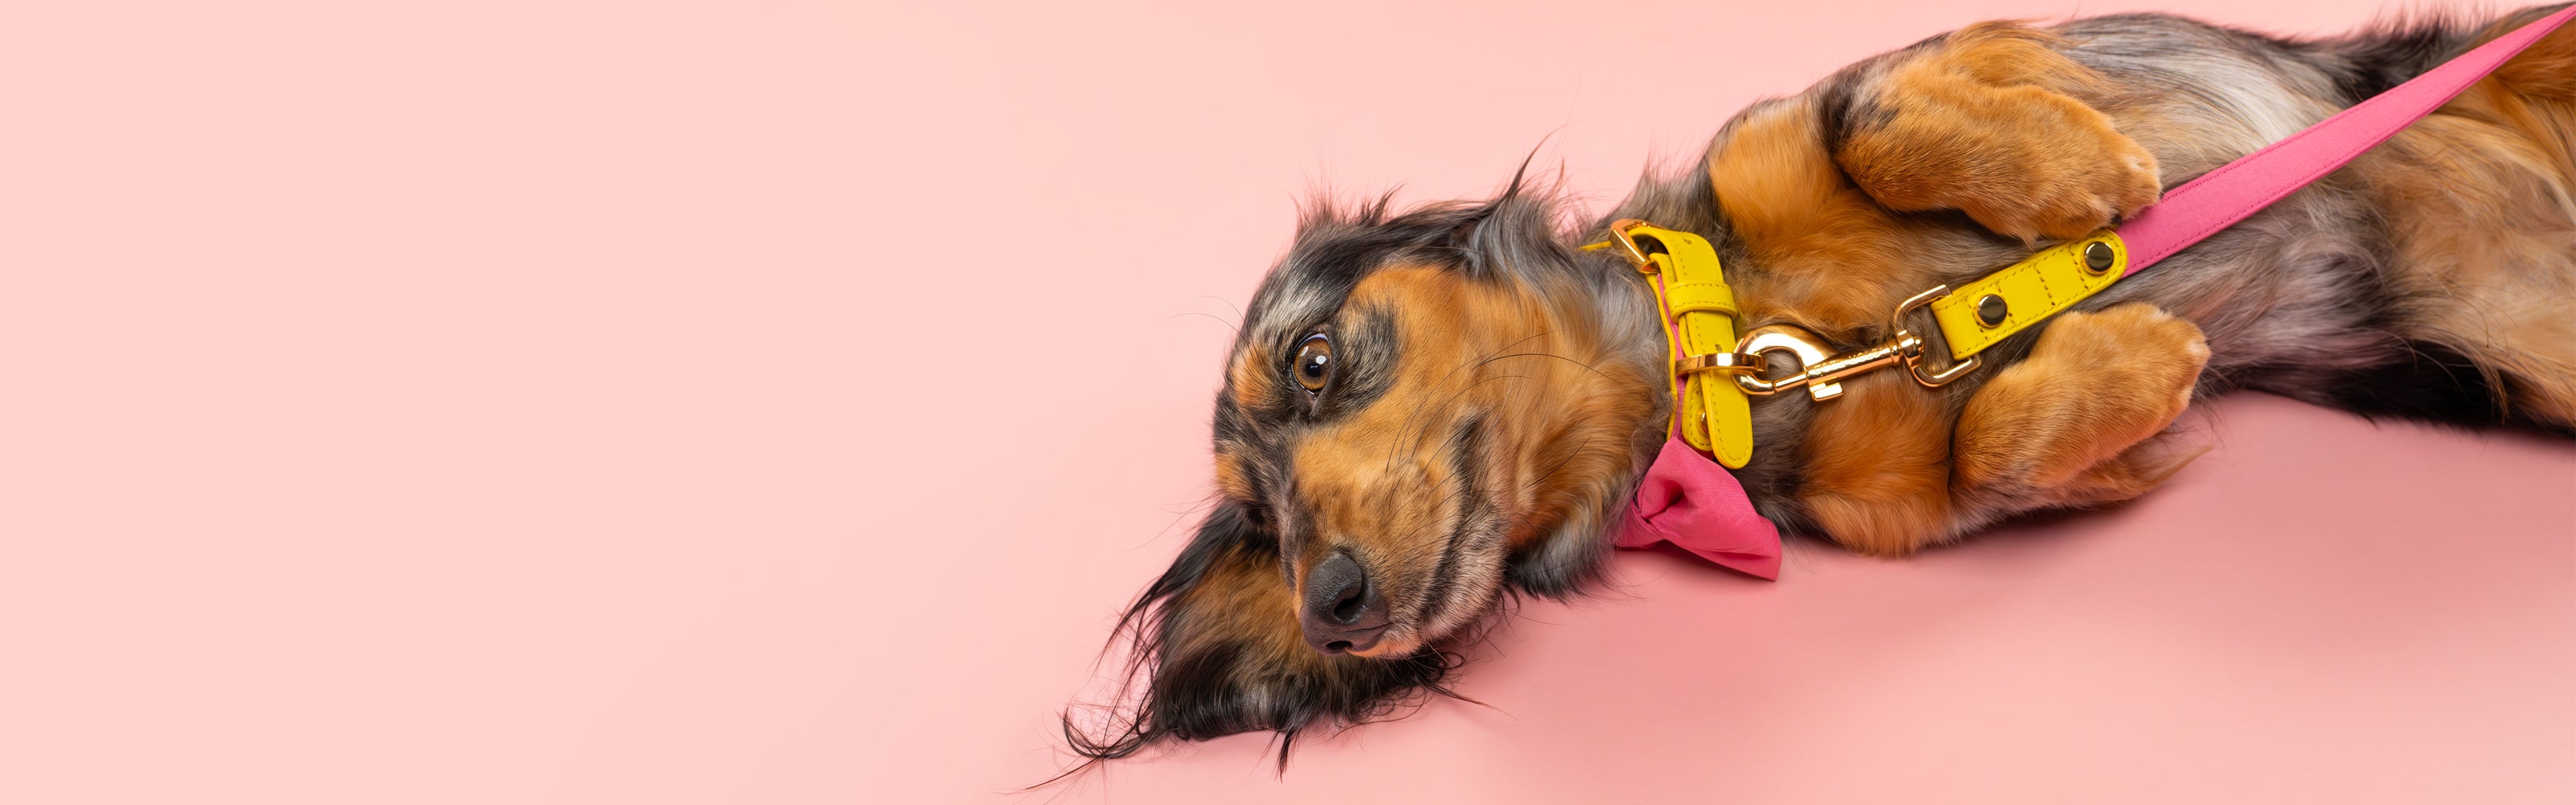 Dachshund lying down modelling Dear Nora Bubblegum dog collar and leash set - pink backdrop - about us banner image